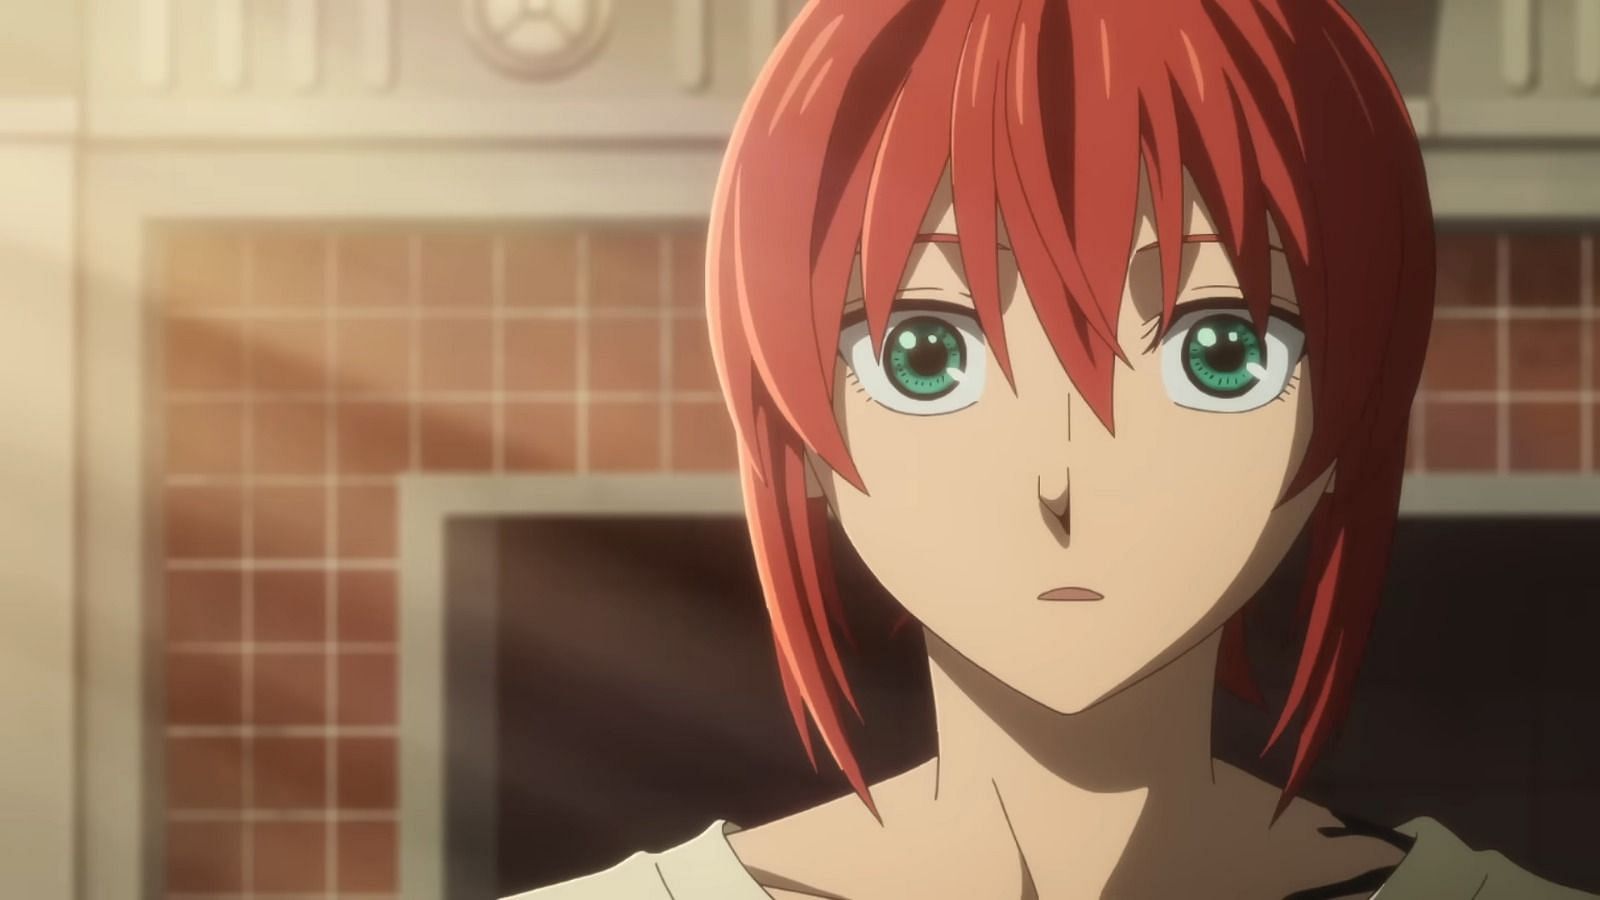 Chise as seen in the promotional clip. (Image via Studio Kafka)